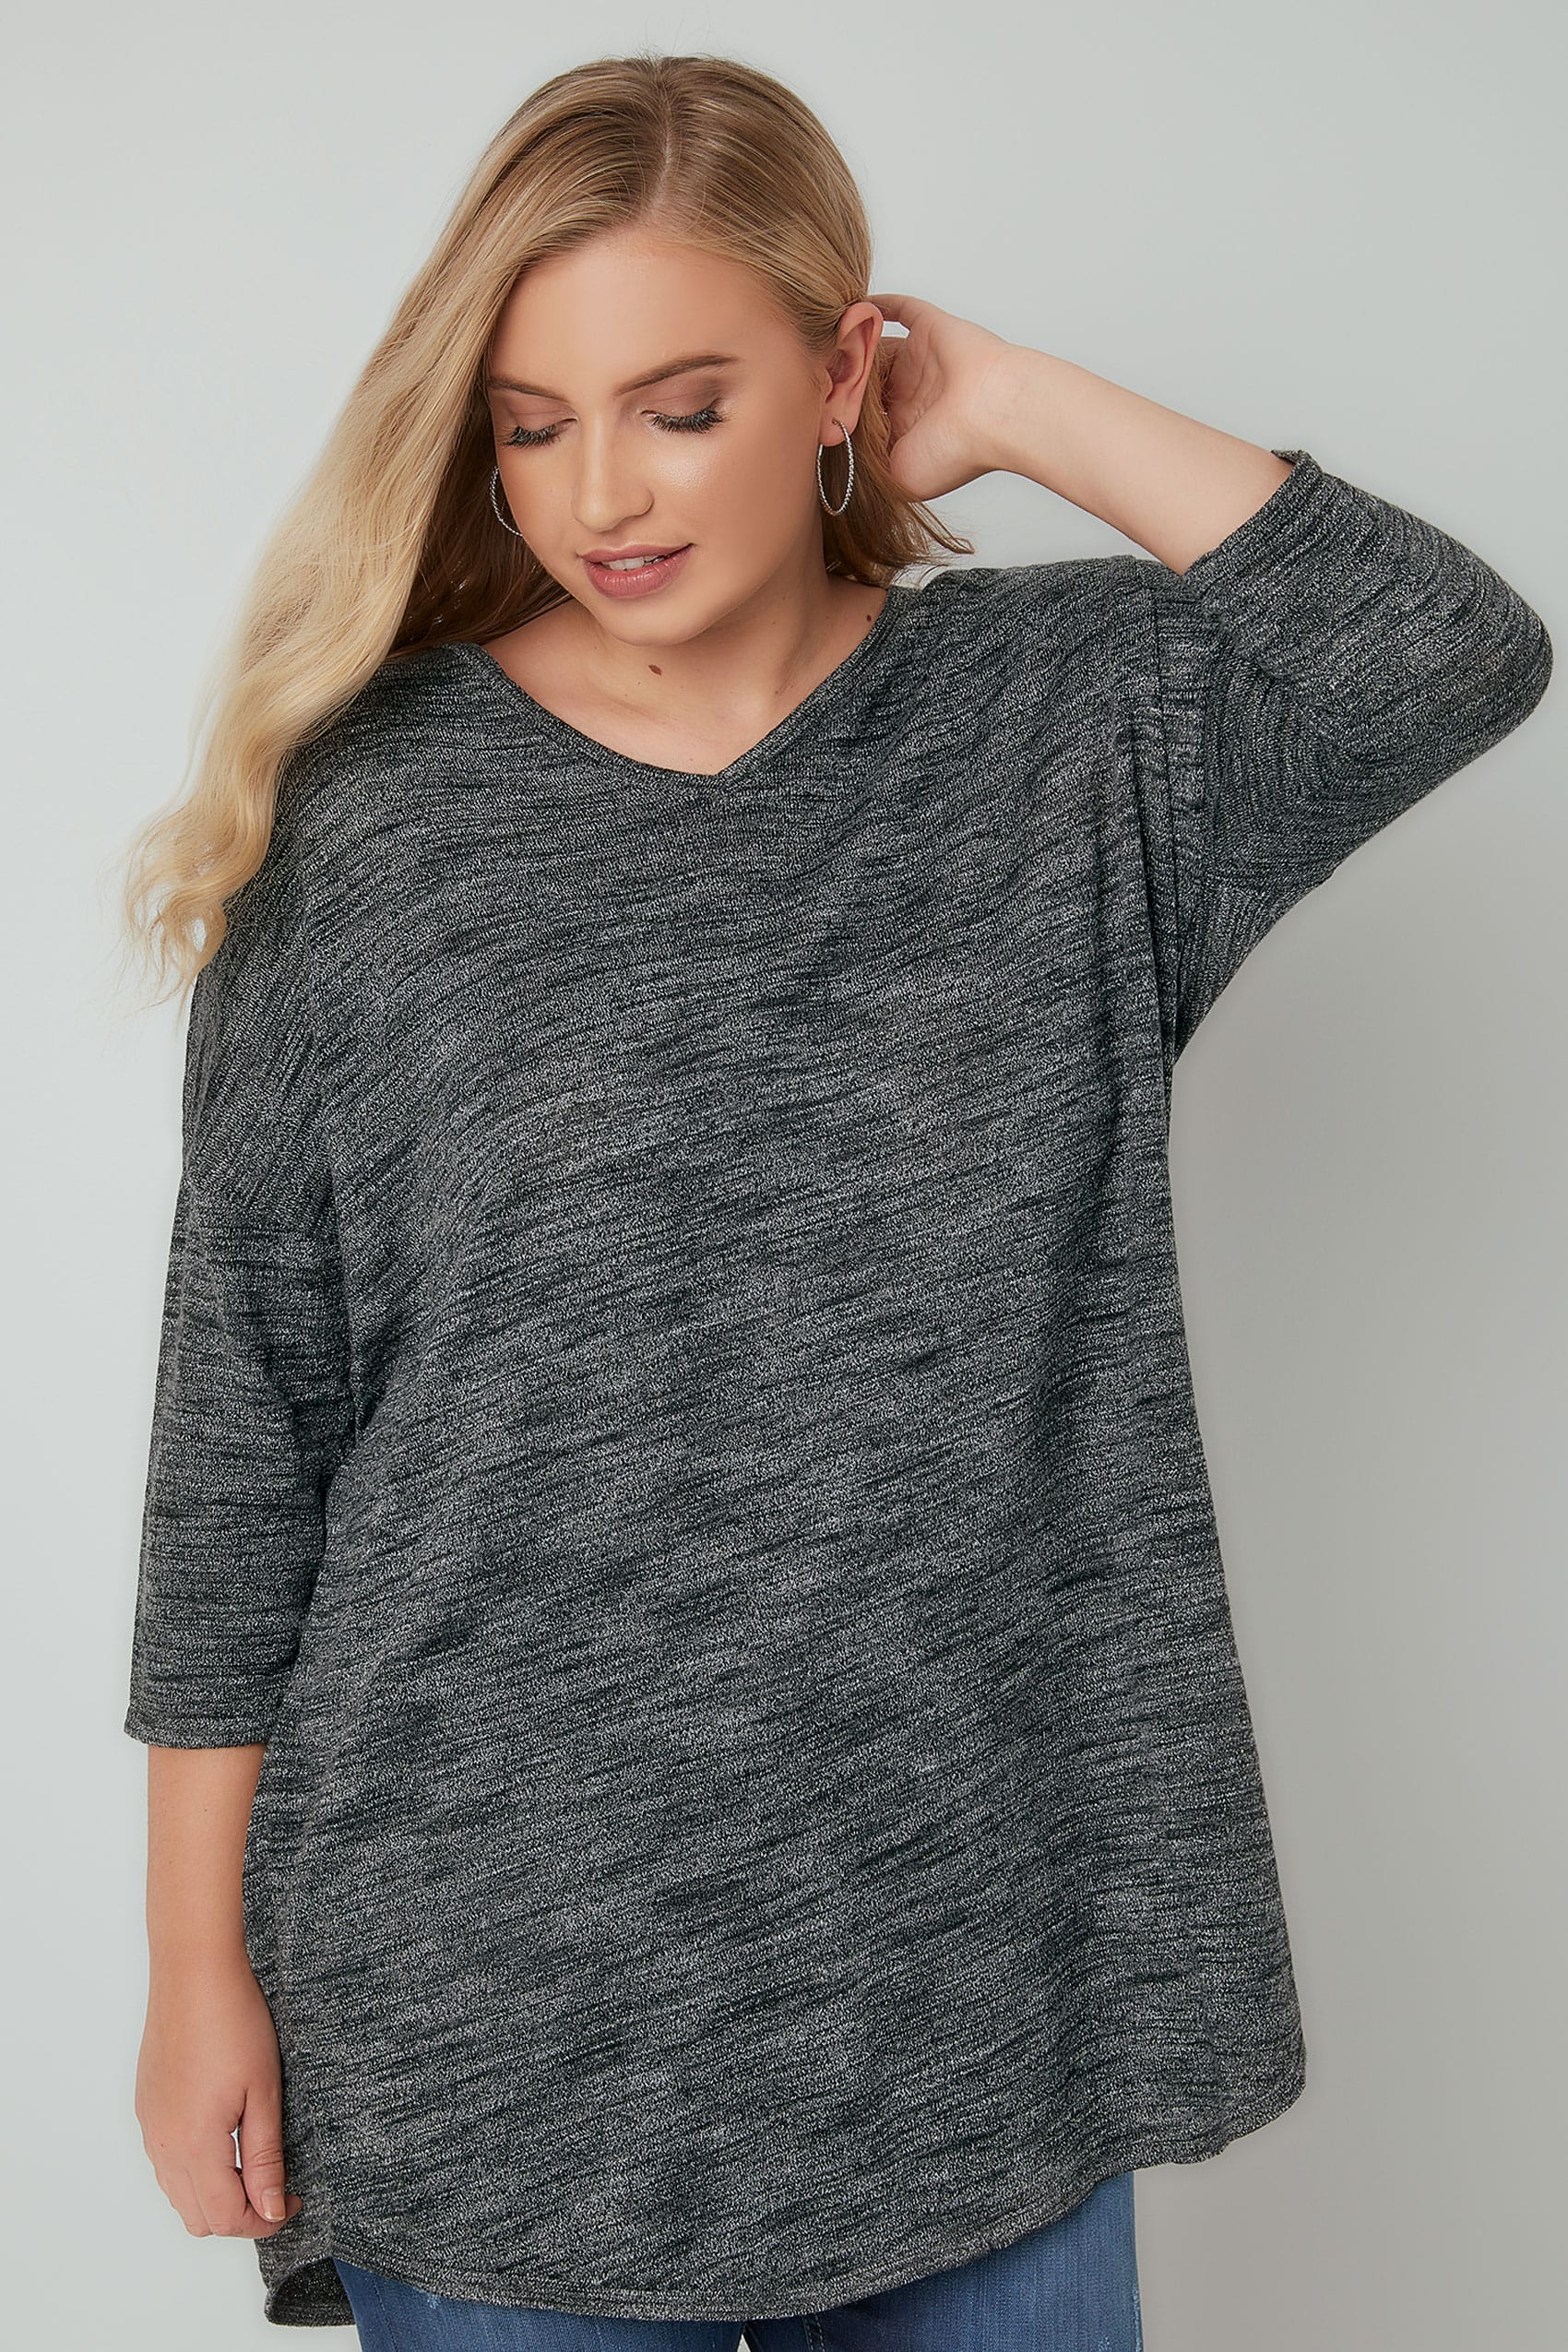 Dark Grey Longline Knitted Top With Cross Over Straps, Plus size 16 to 36